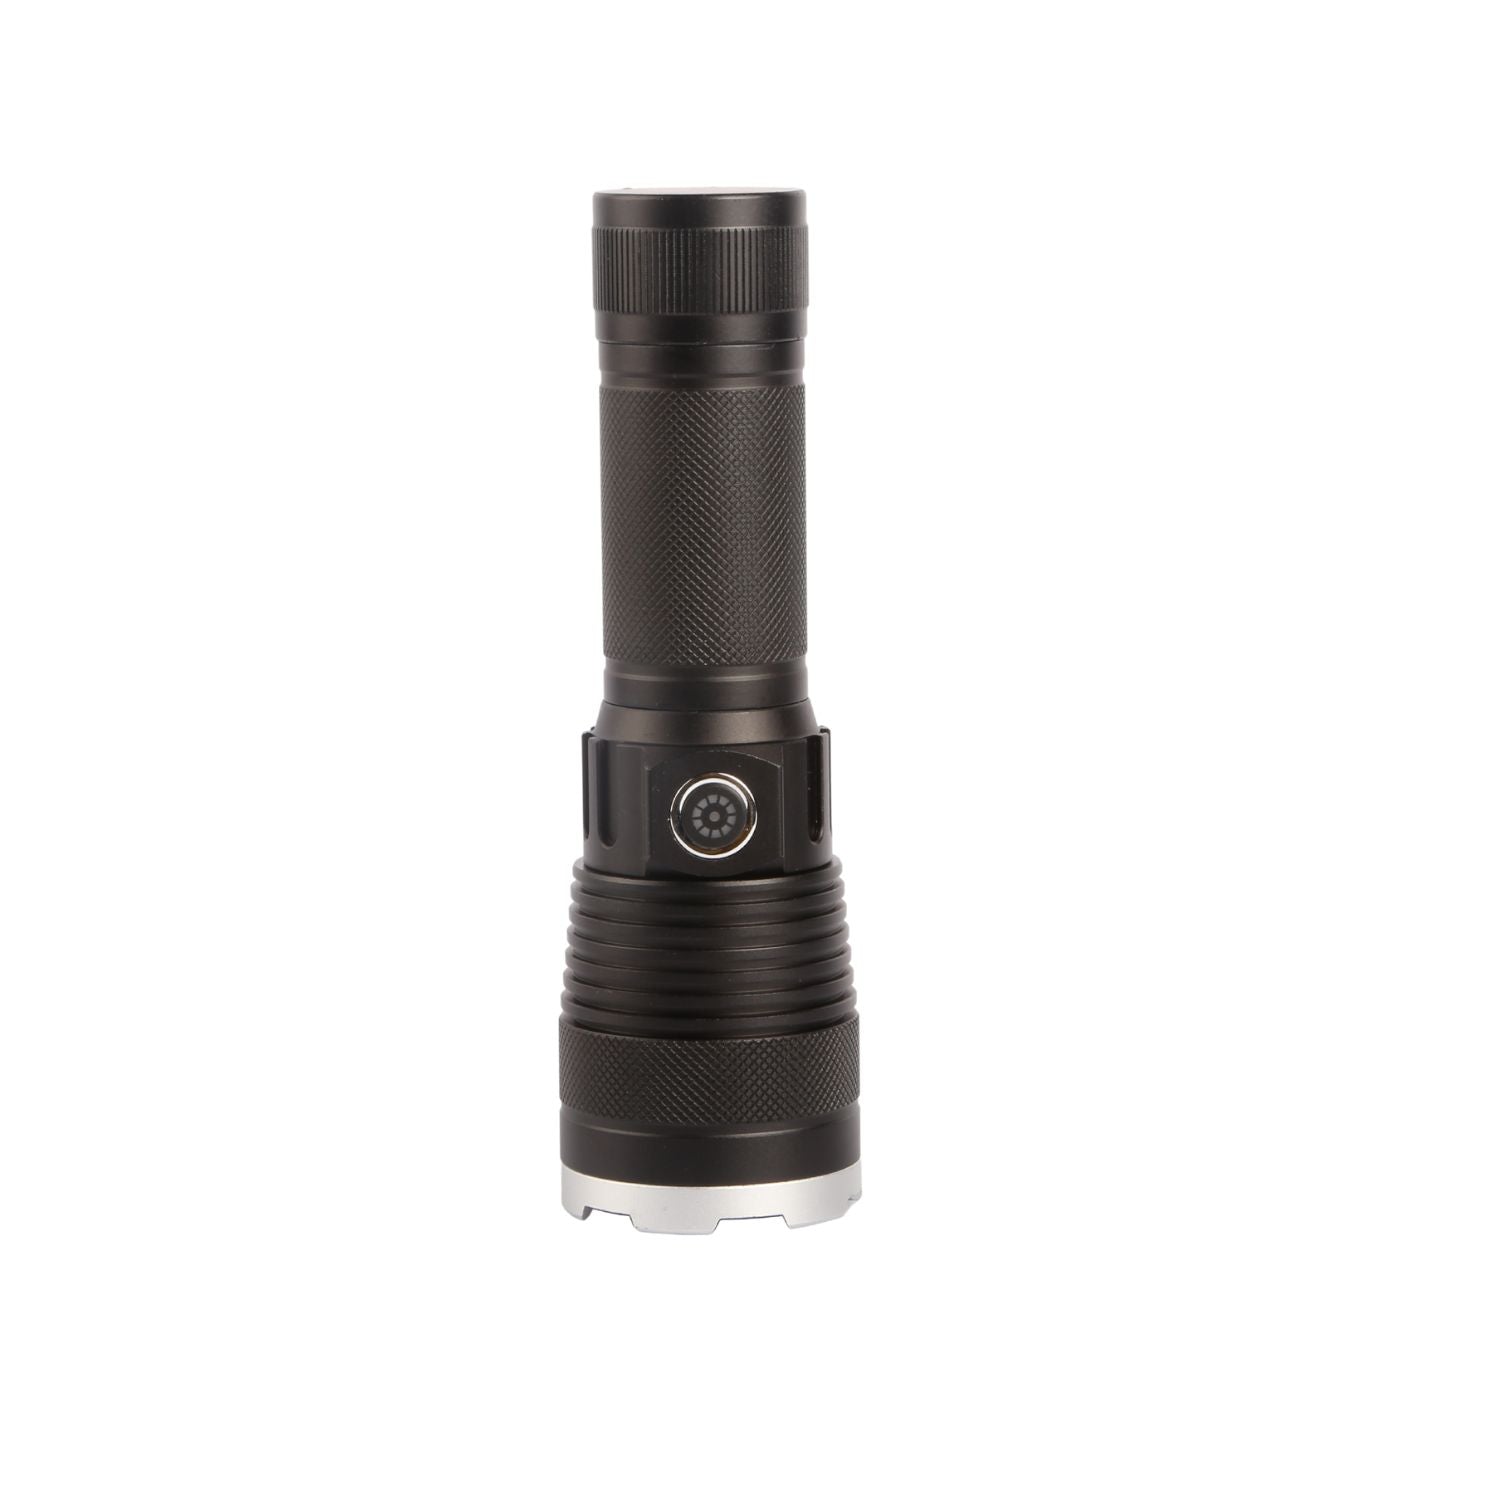 Rechargable Flashlight 1200 High Lumens with 5 Modes KR-RF-100-RB